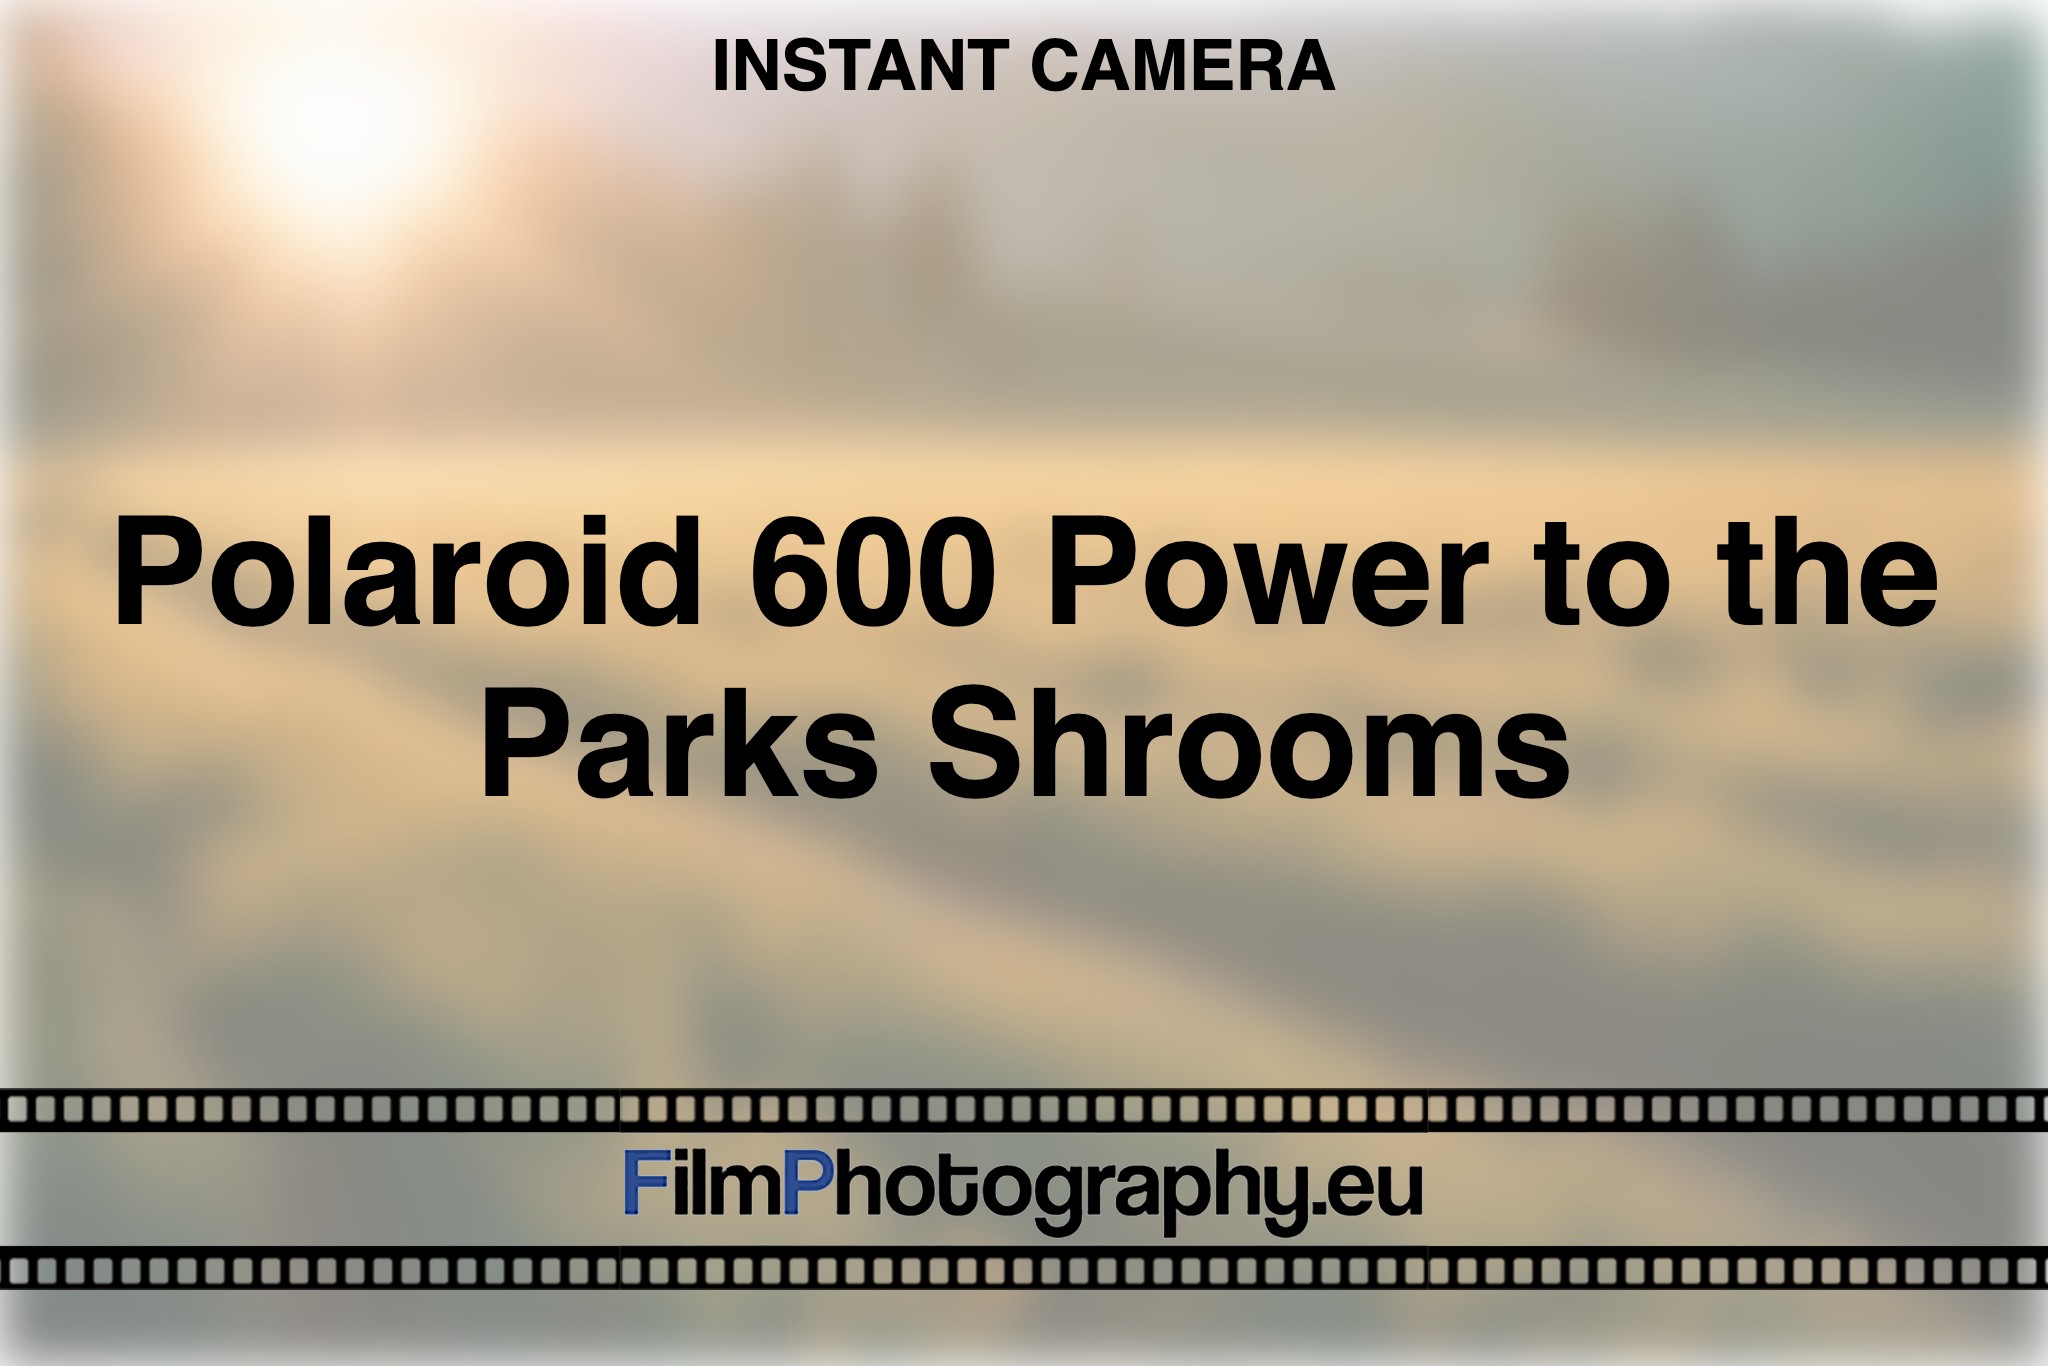 polaroid-600-power-to-the-parks-shrooms-instant-camera-bnv